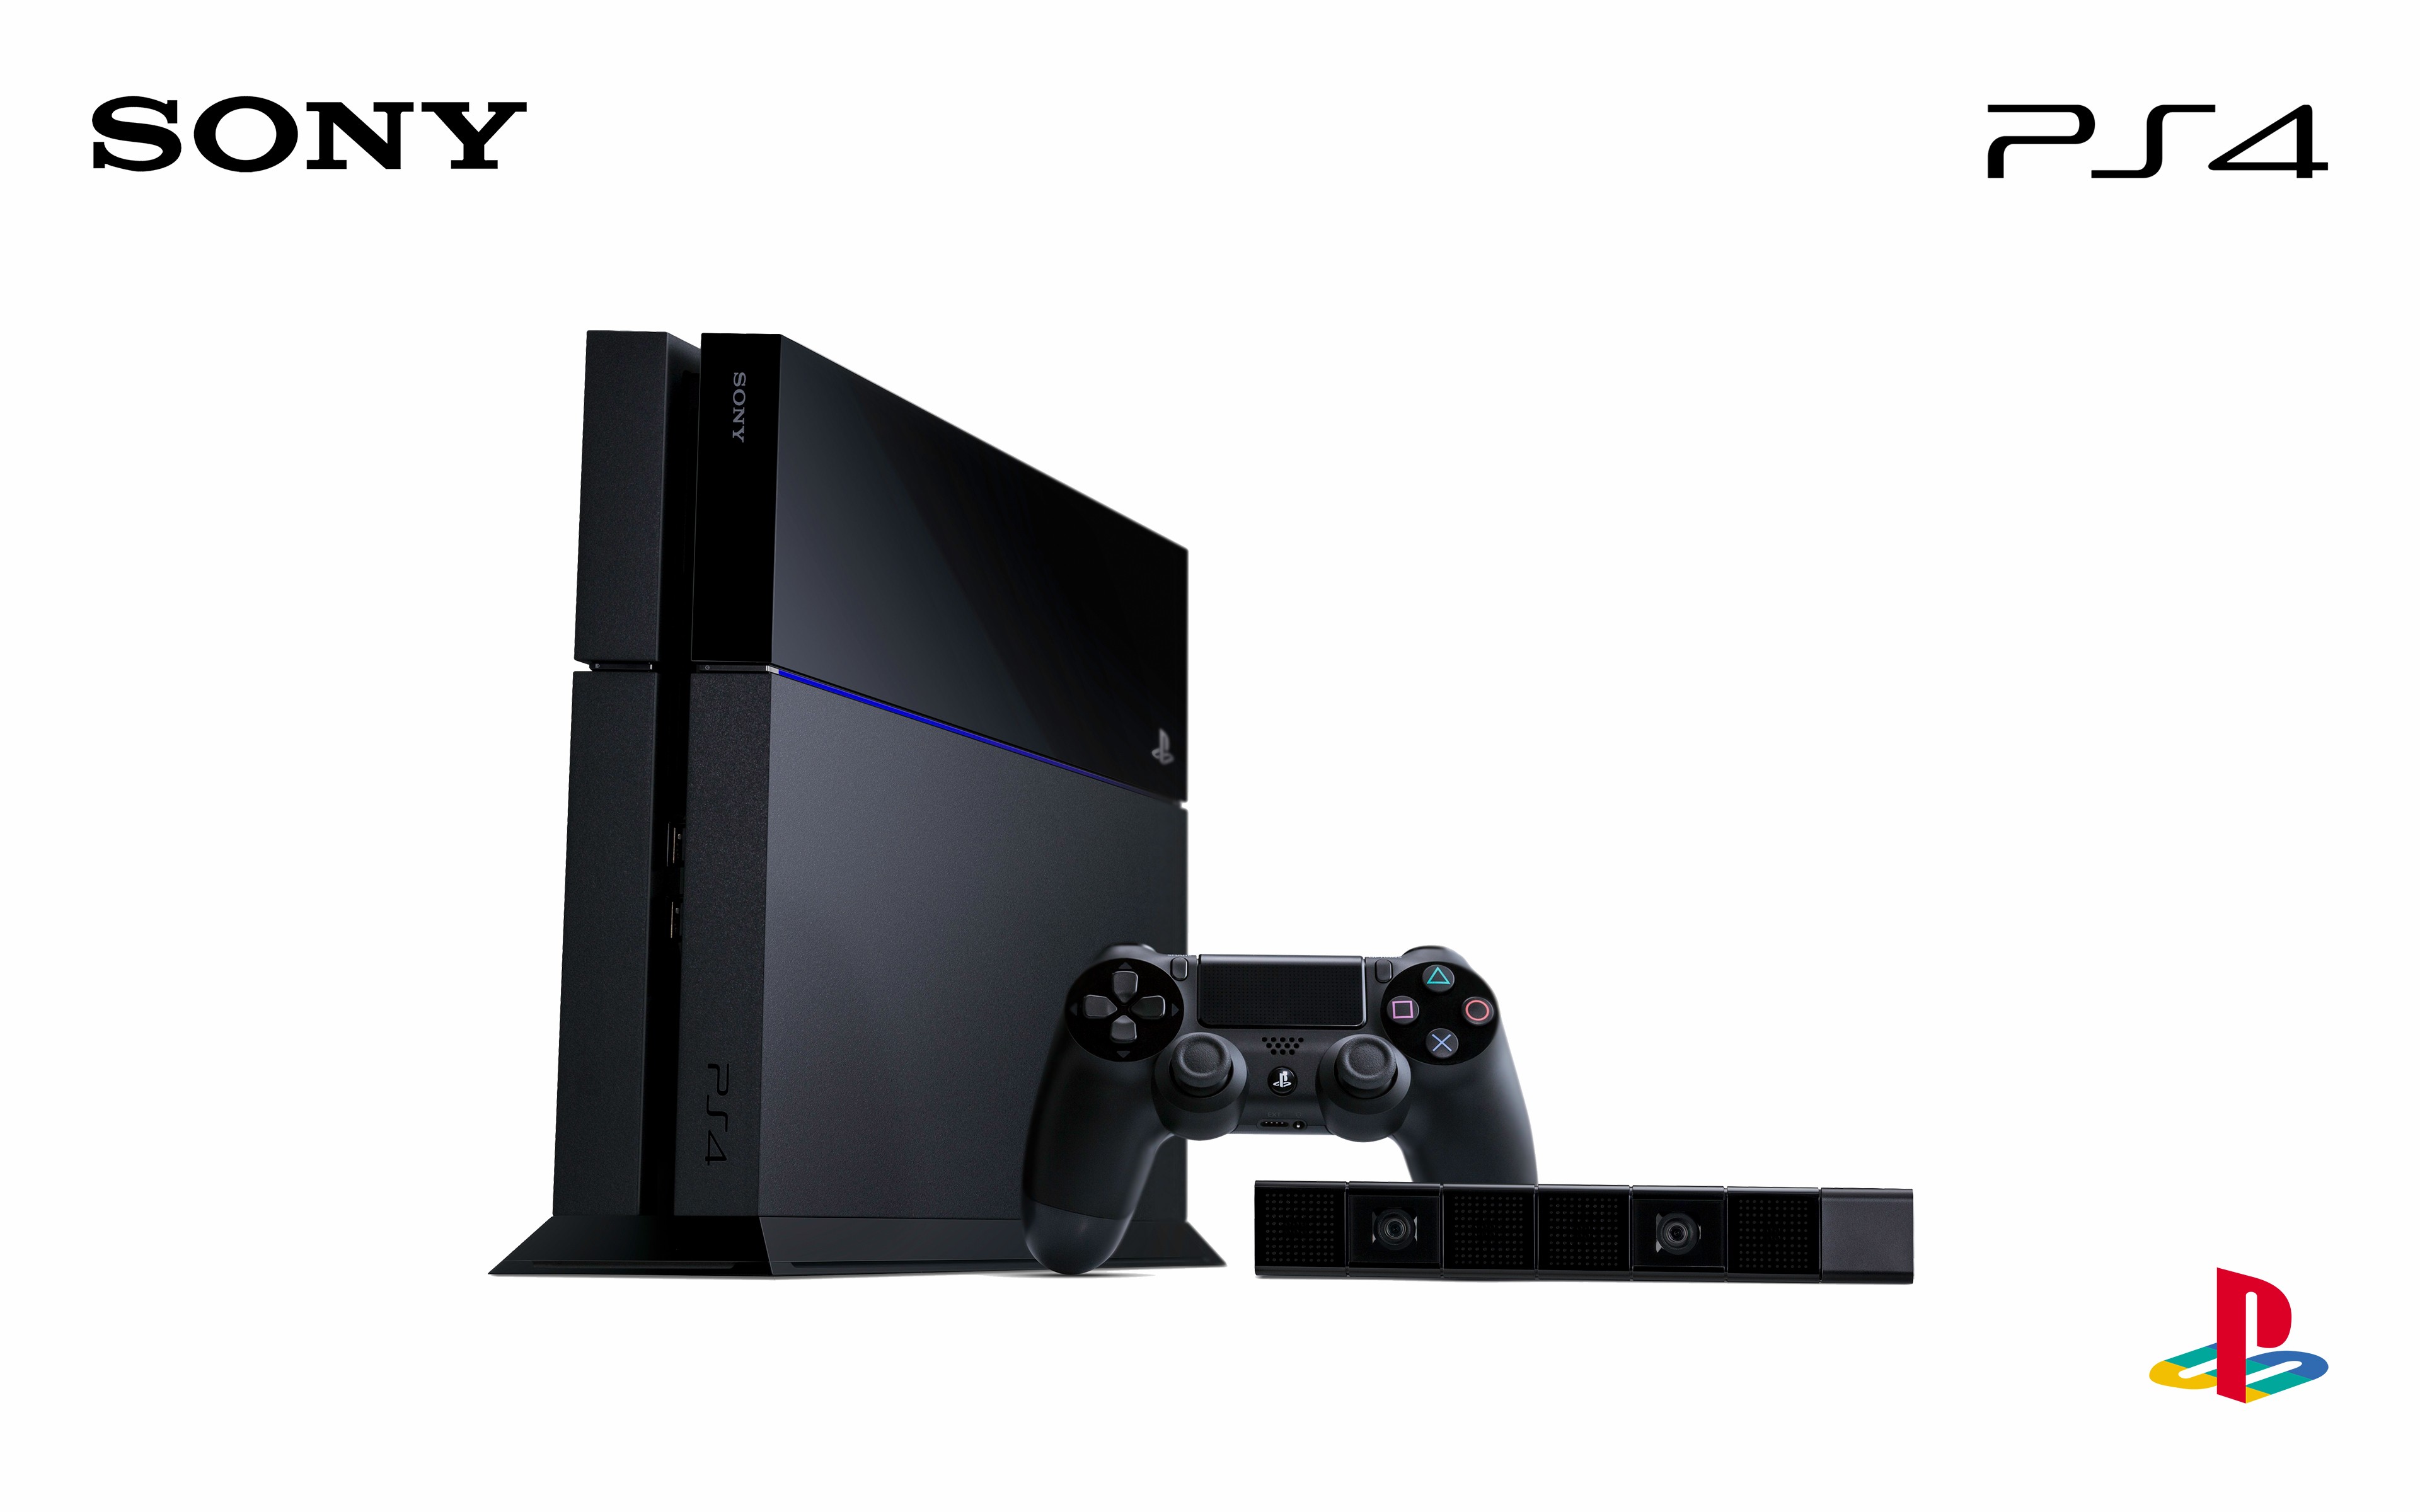 PlayStation 4, Consoles, Sony, Video Games, Simple Background Wallpaper